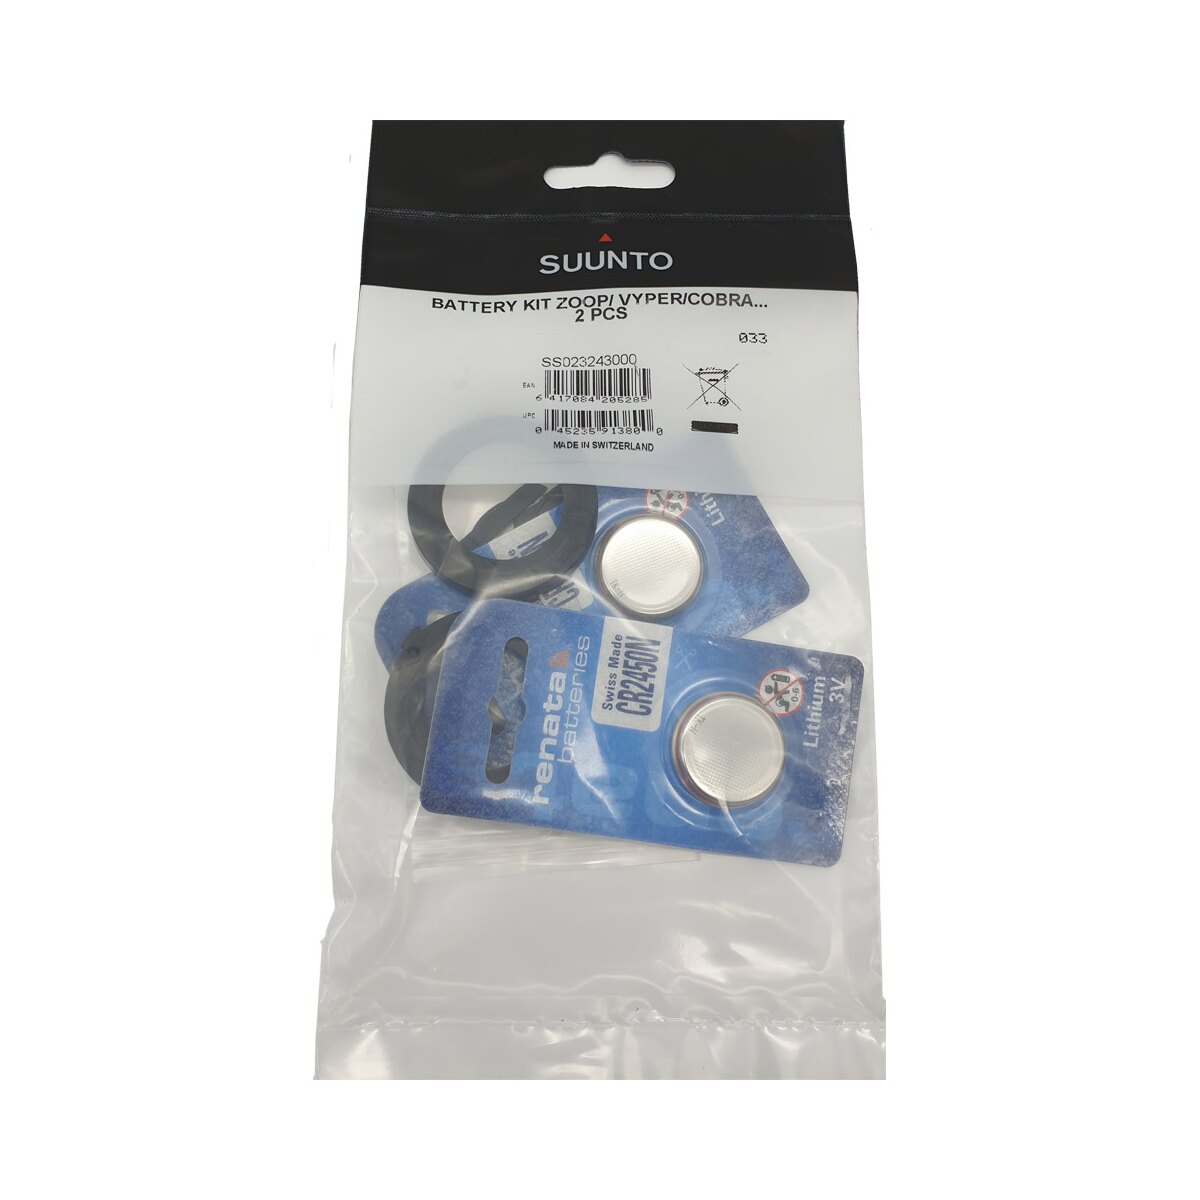 NEW! Battery Kit For Suunto HelO2 Vyper Air & Zoop 